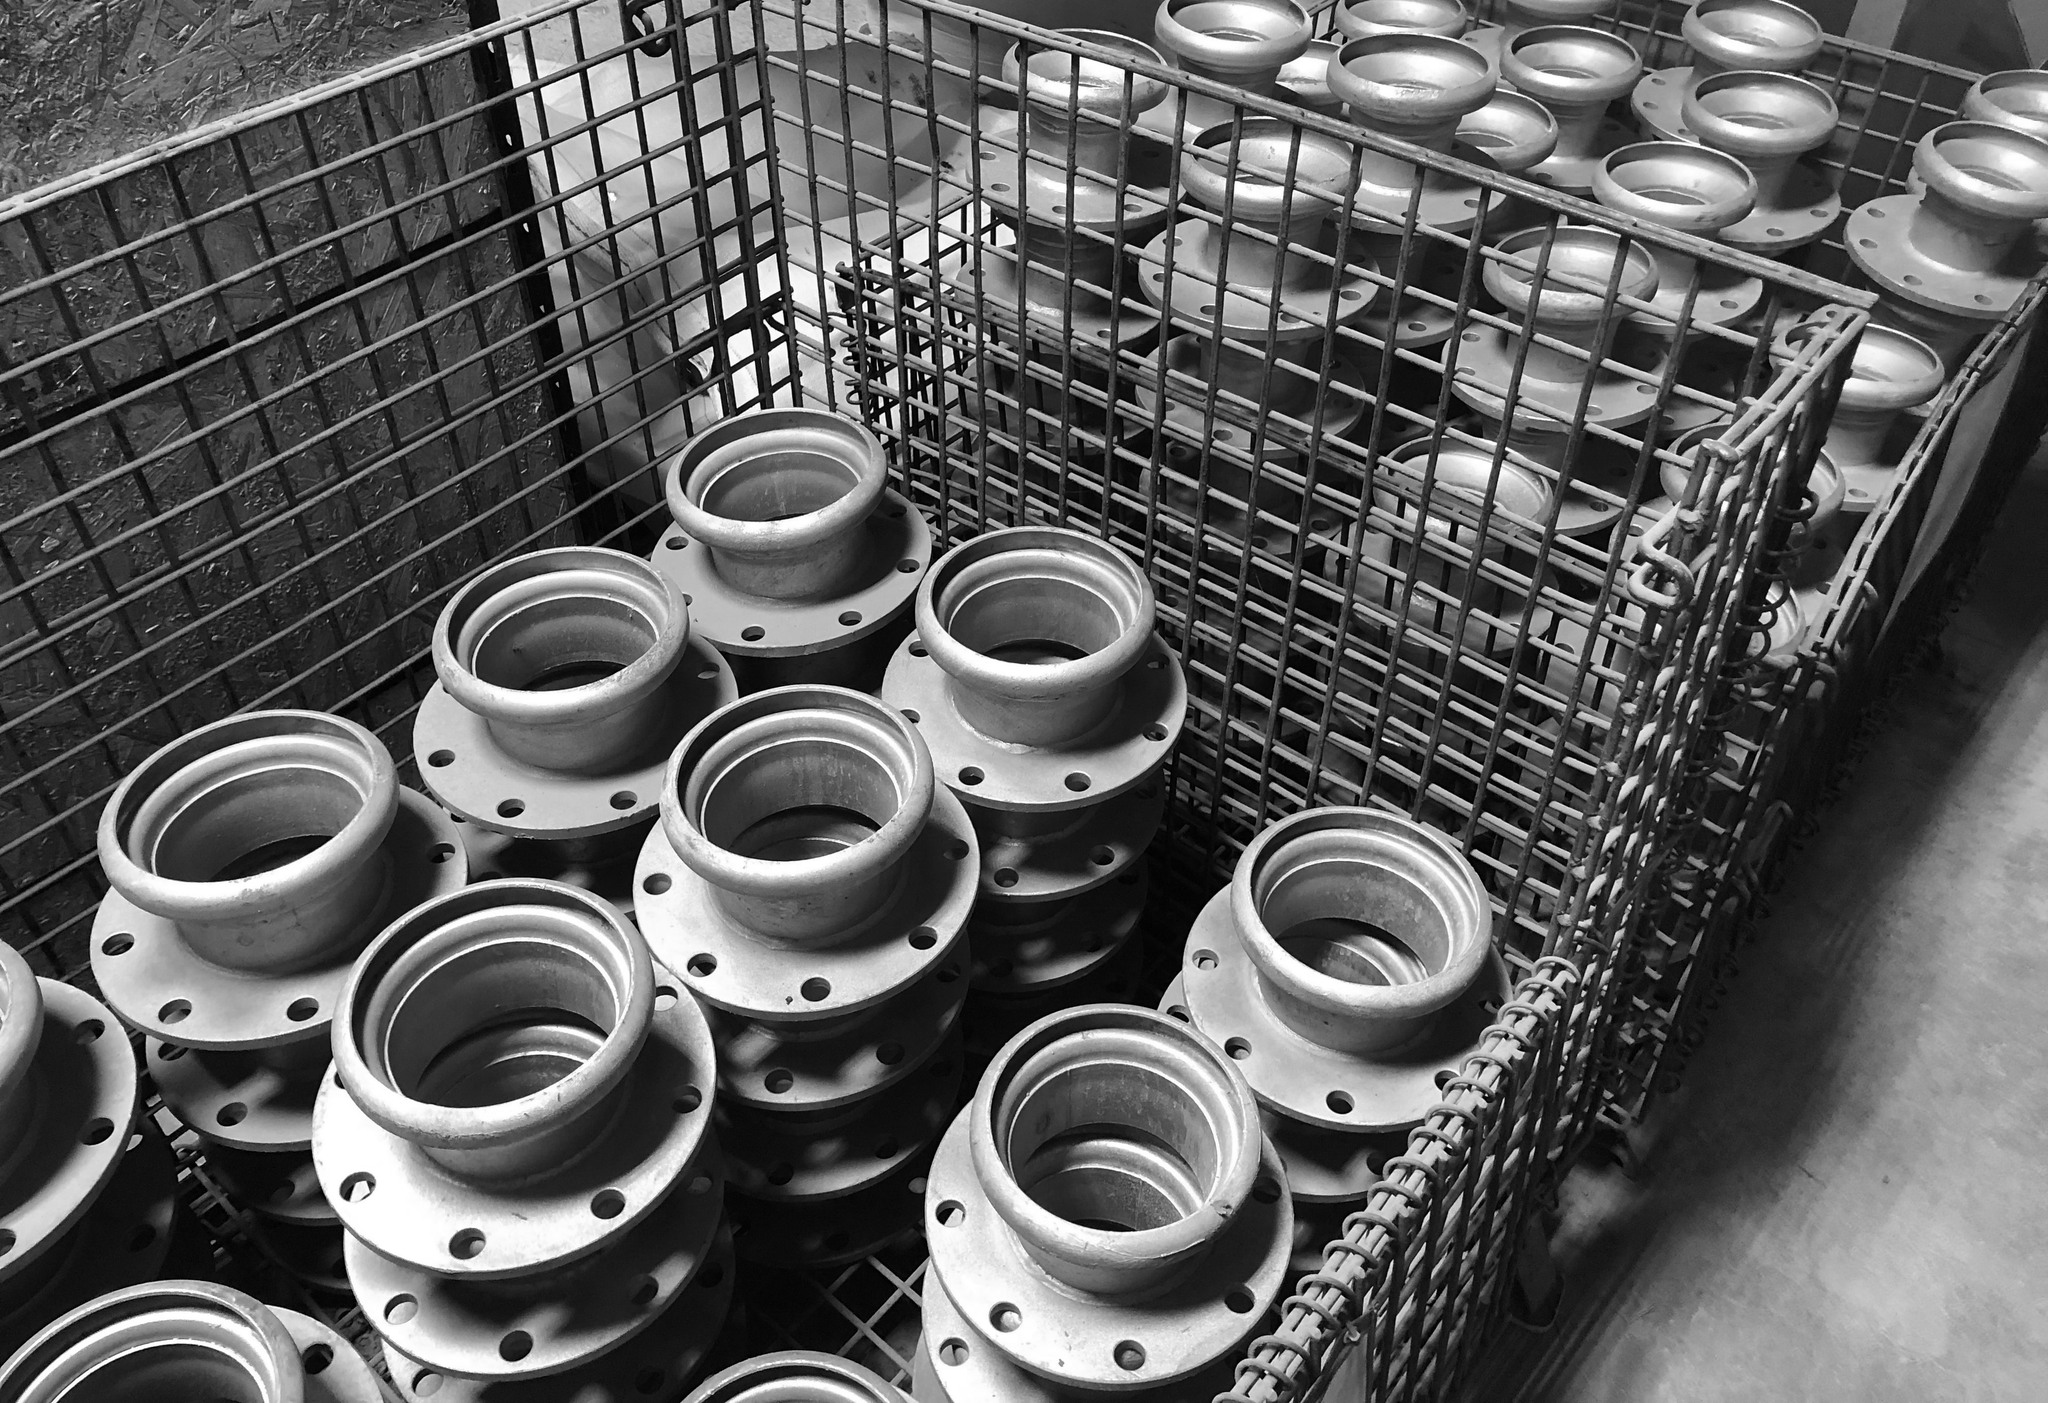 Basket of flanged fittings from Wolf Creek portable piping